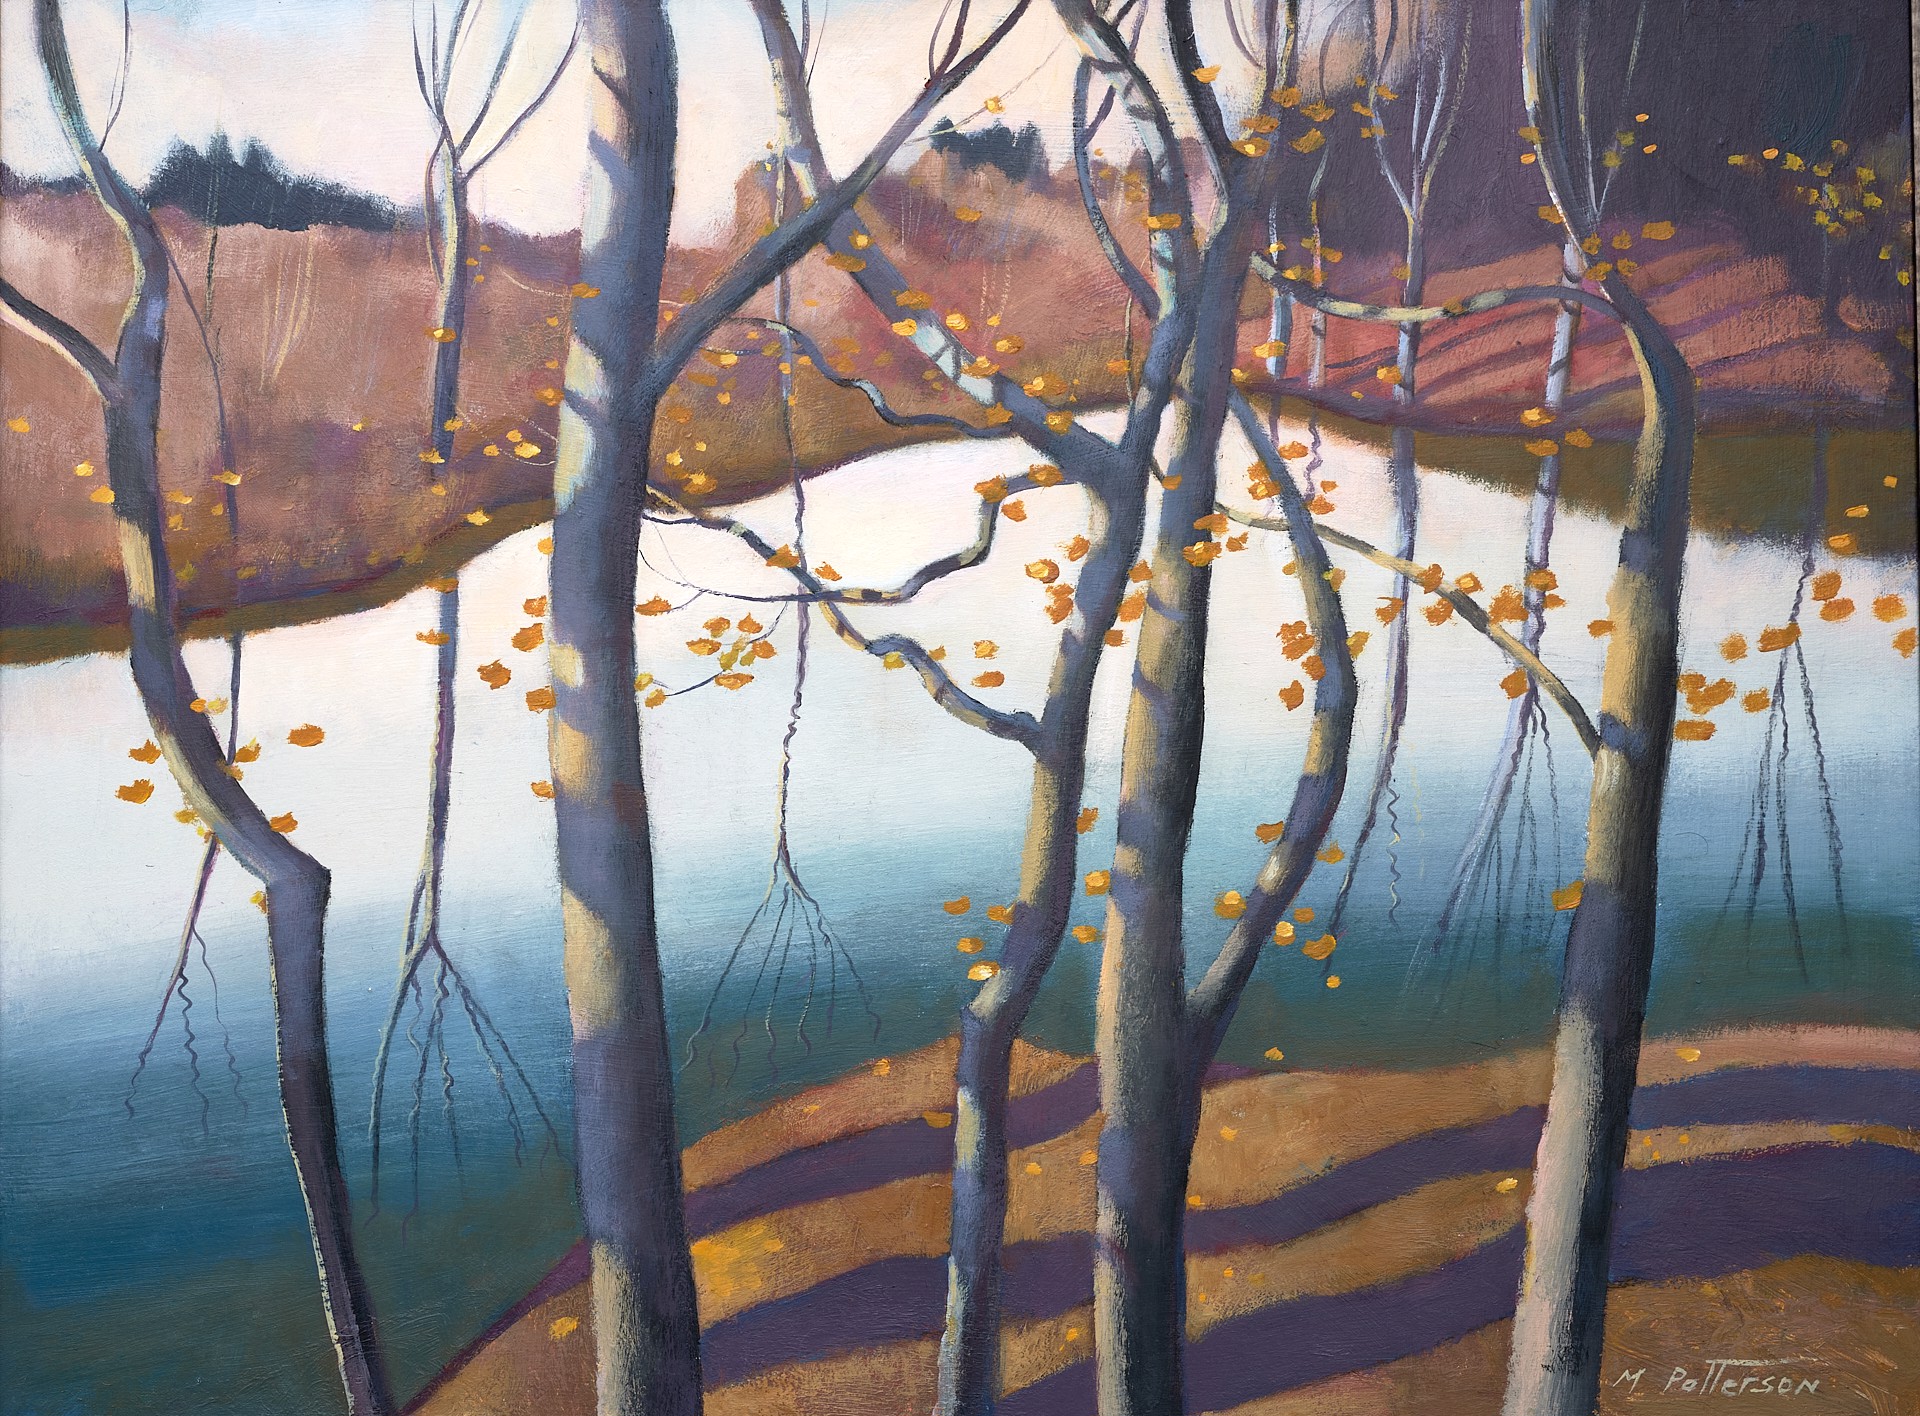 Trees at the River Bend by Michael Patterson